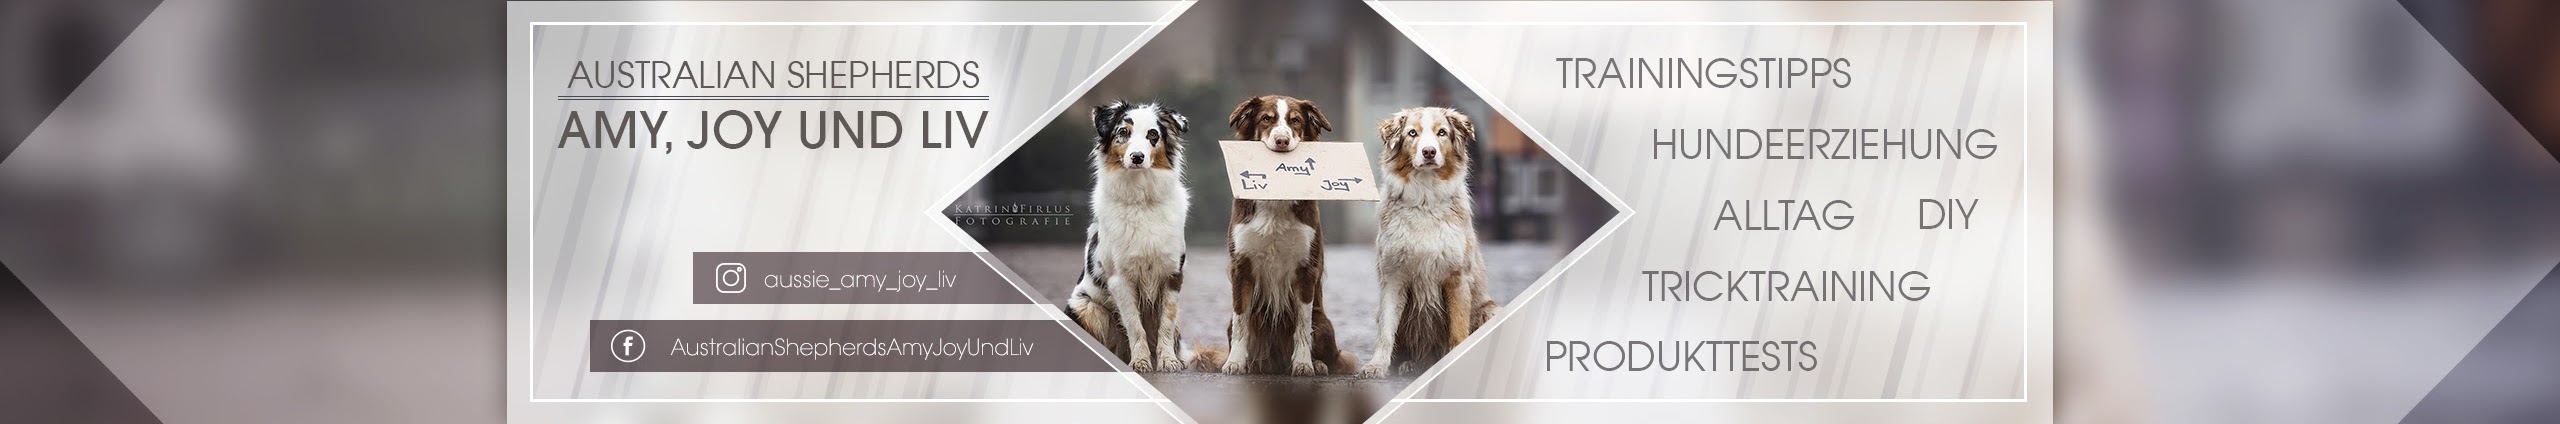 Australian Shepherds Amy, Joy und Liv YouTube Channel Analytics and Report  - Powered by NoxInfluencer Mobile